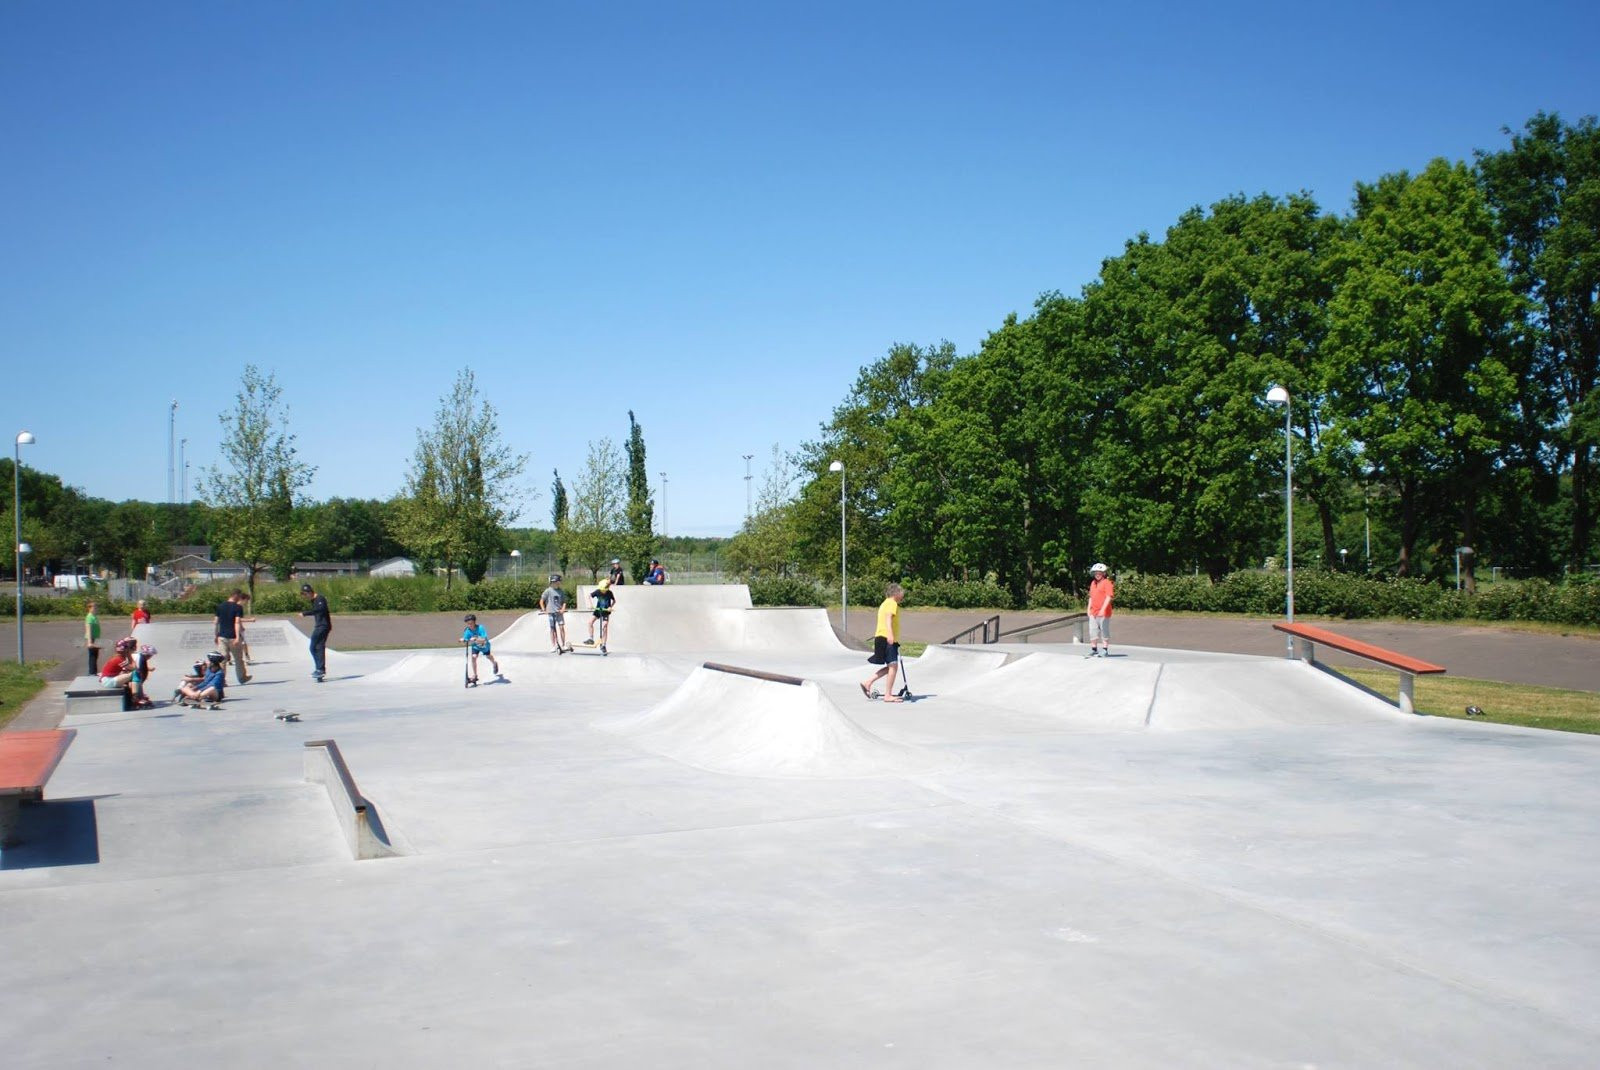 Kalundborg Skatepark is challenging for experienced skaters, but also great for beginners. The design of the park is well thought through which ensures a good session without too much wasted energy.